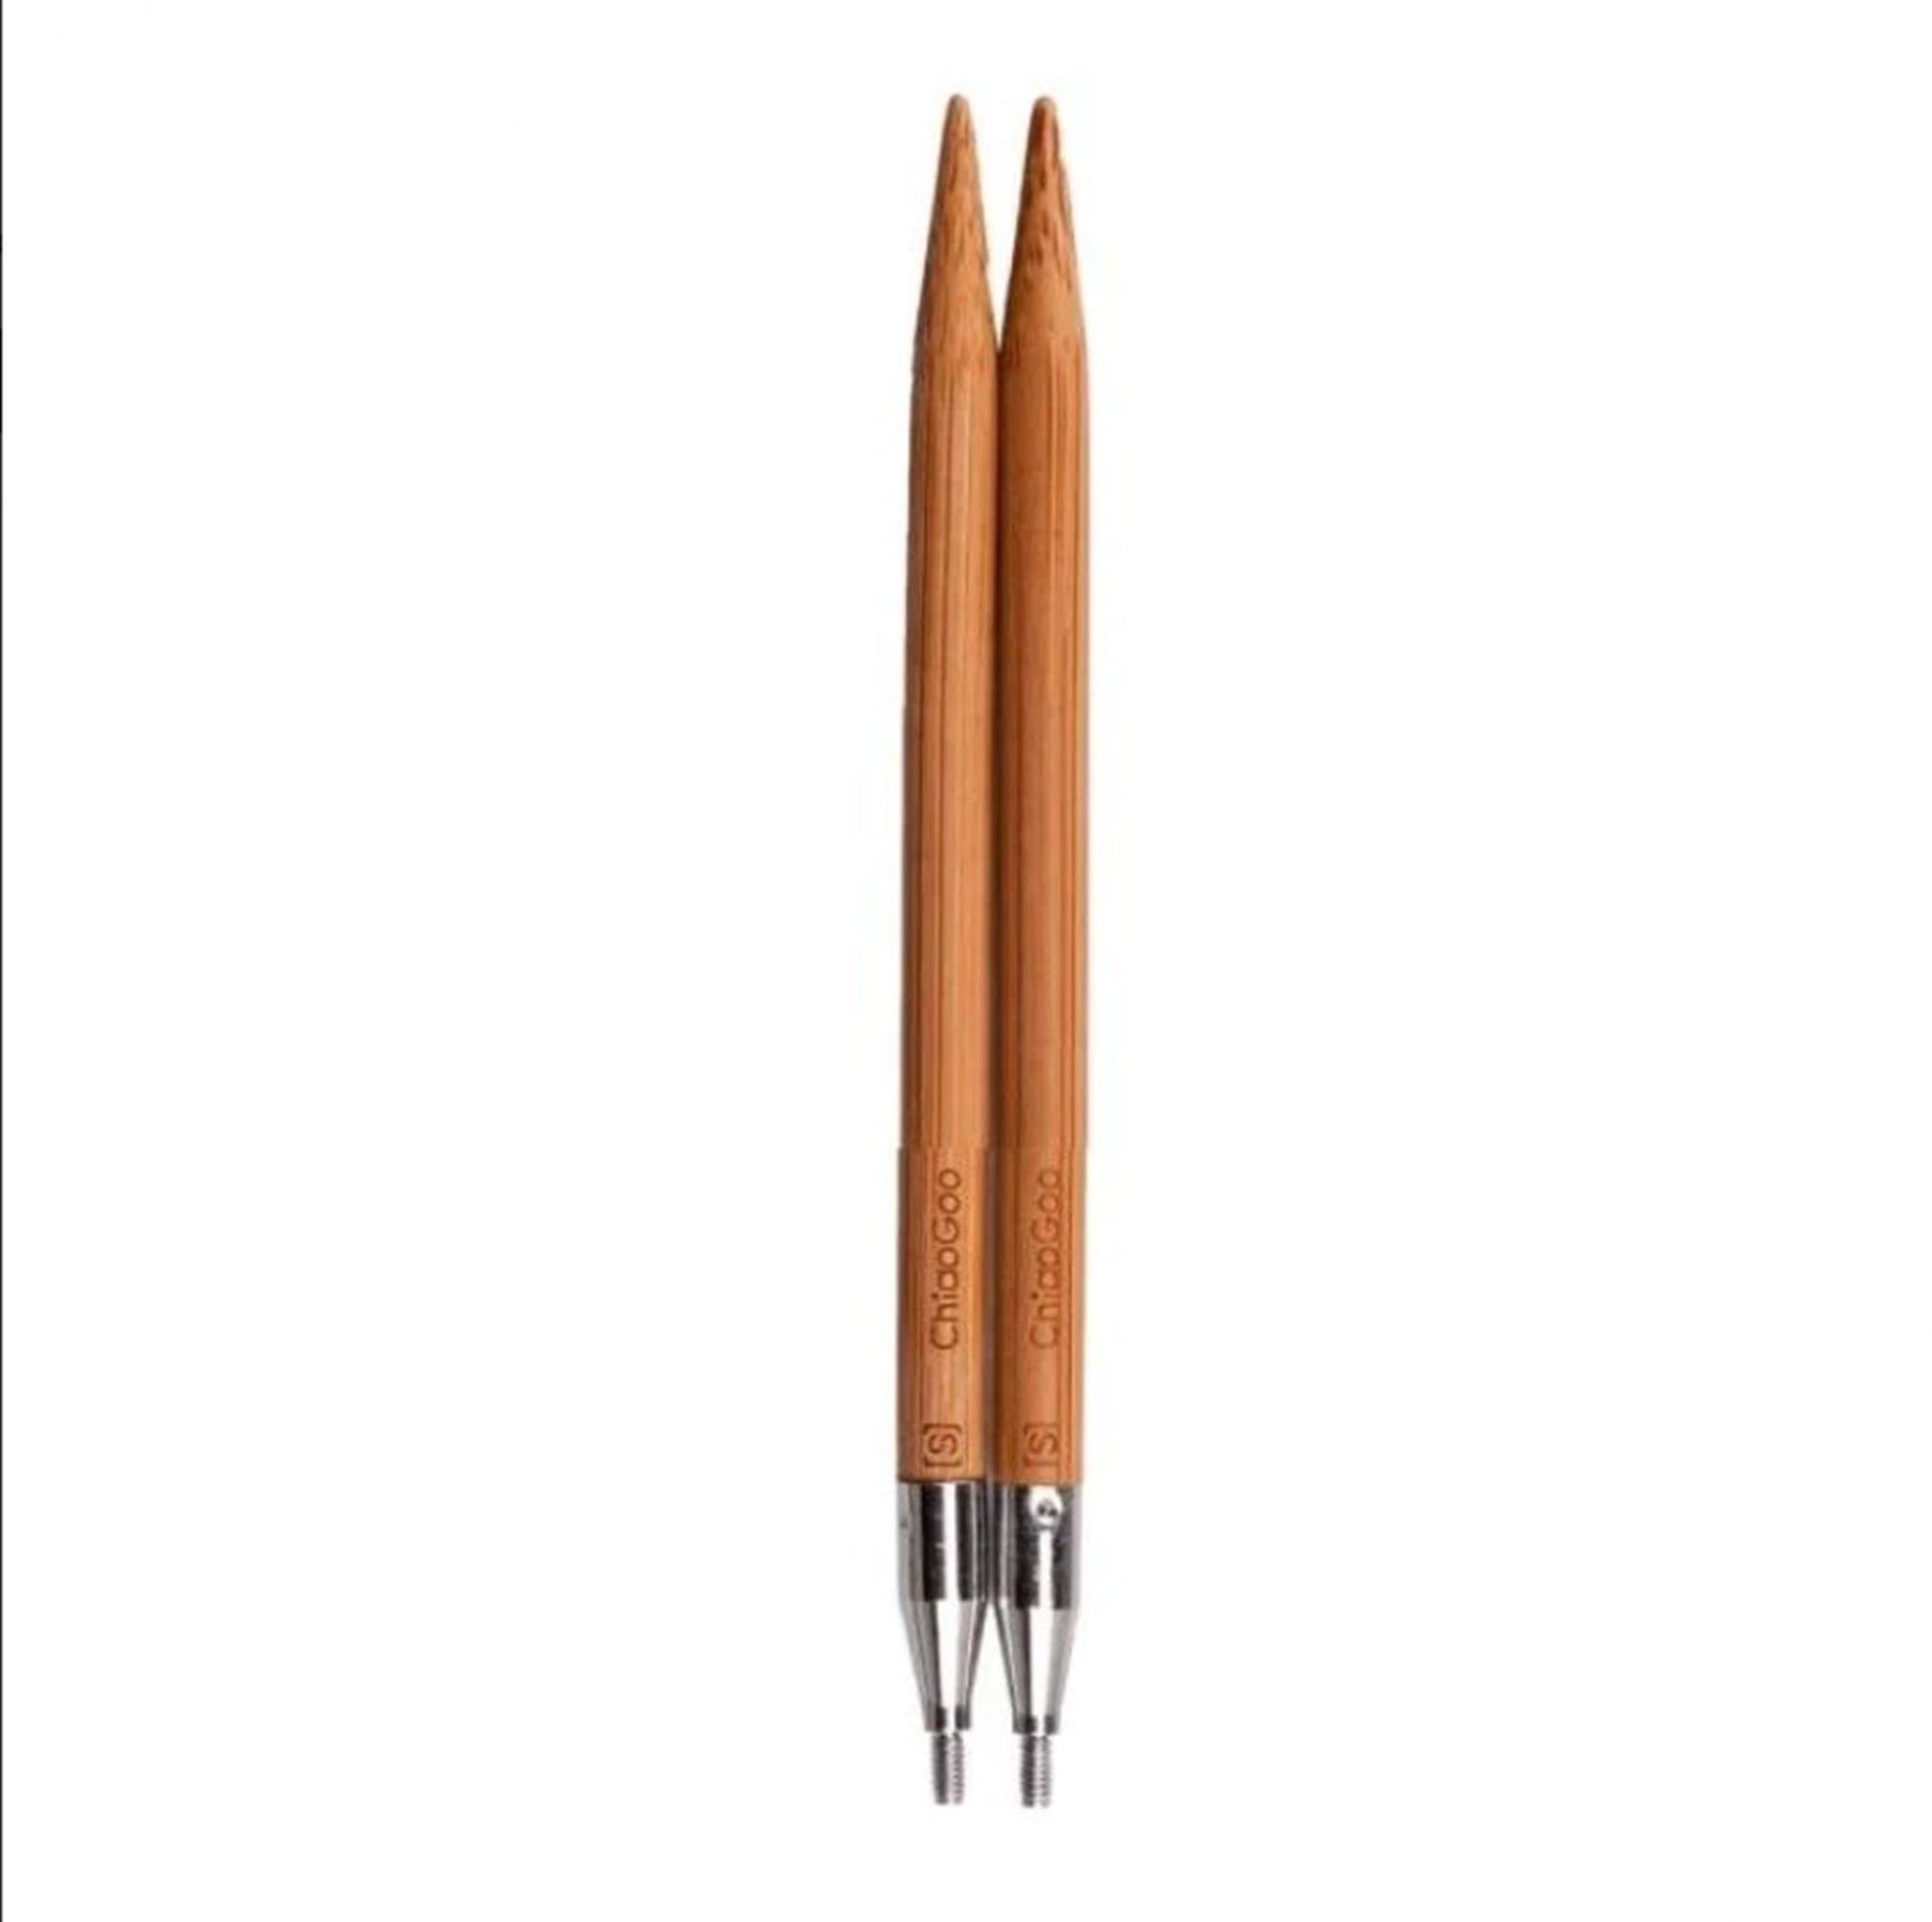 ChiaoGoo 4 inch (10 cm) Spin Knitting Needle Tip Bamboo - Size US-2 (2.75 mm)